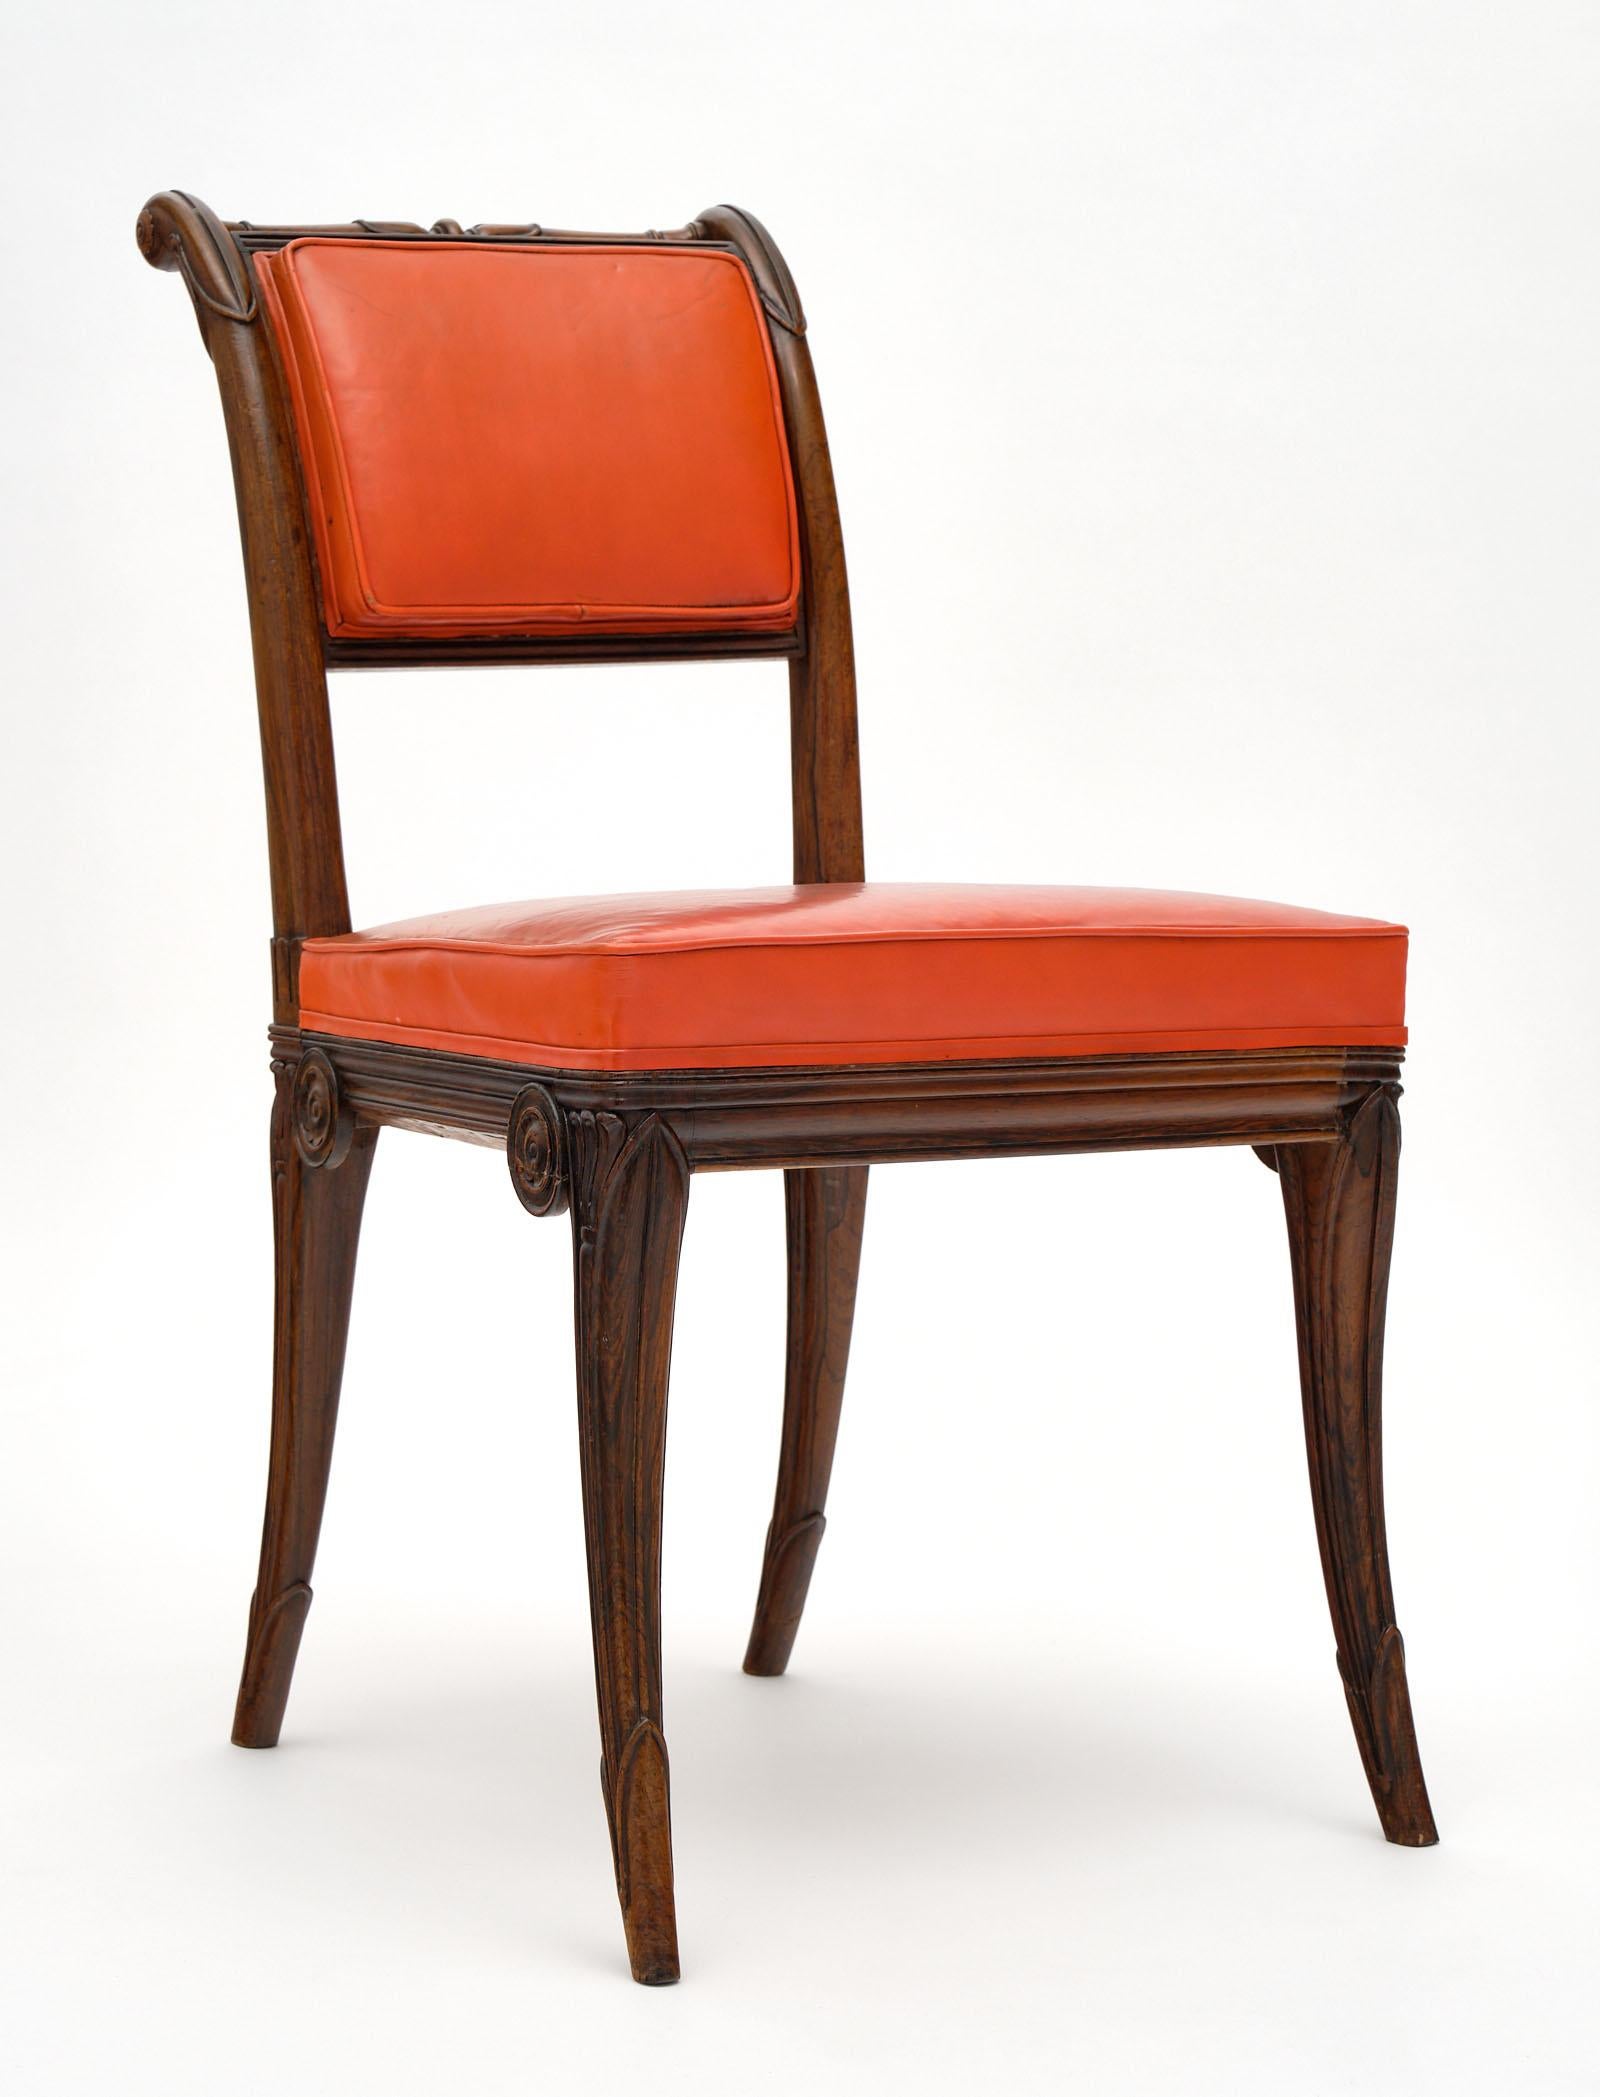 Set of five Charles X style antique dining chairs made of solid, hand carved rosewood. These French chairs feature the original red-orange upholstery.